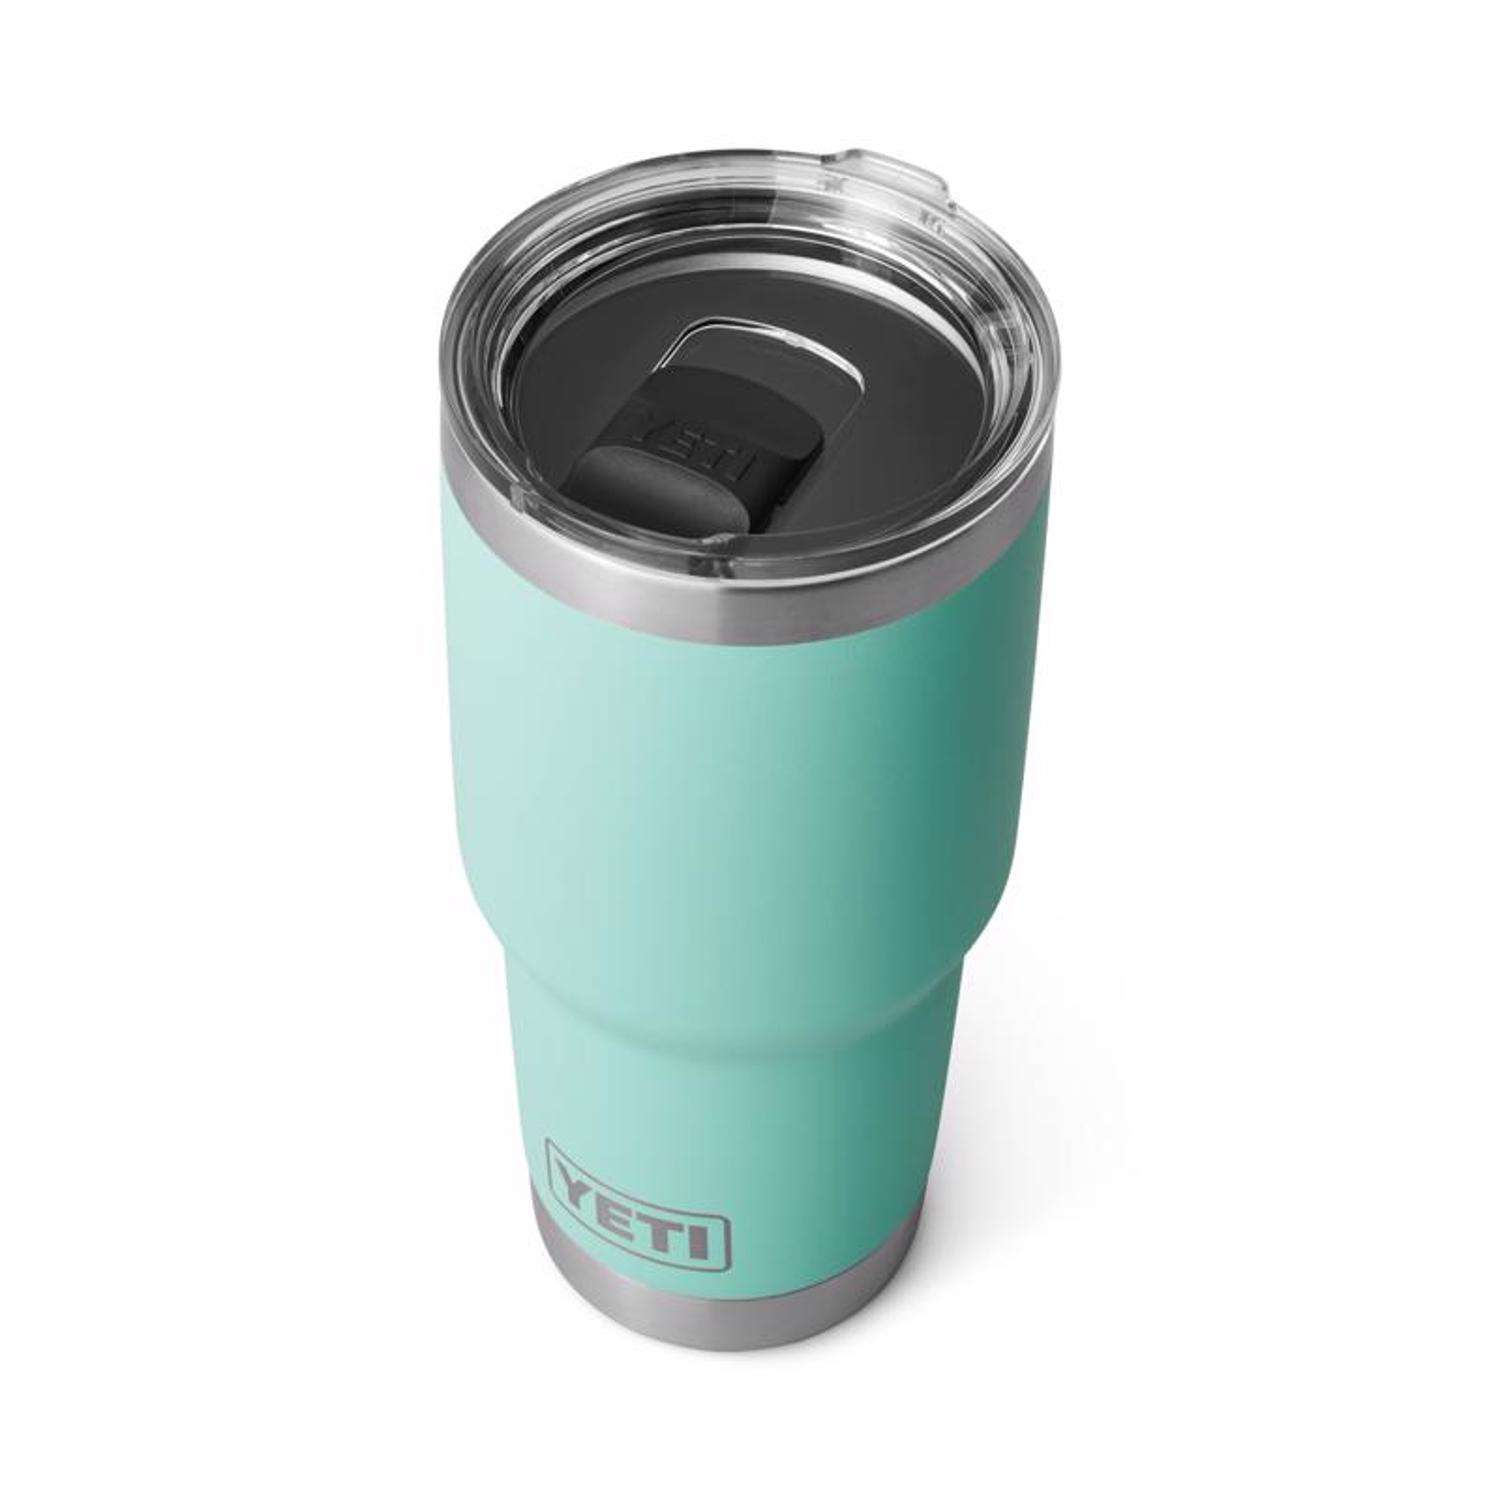 YETI Rambler 10 oz Tumbler, Stainless Steel, Vacuum Insulated with  MagSlider Lid, Canopy Green